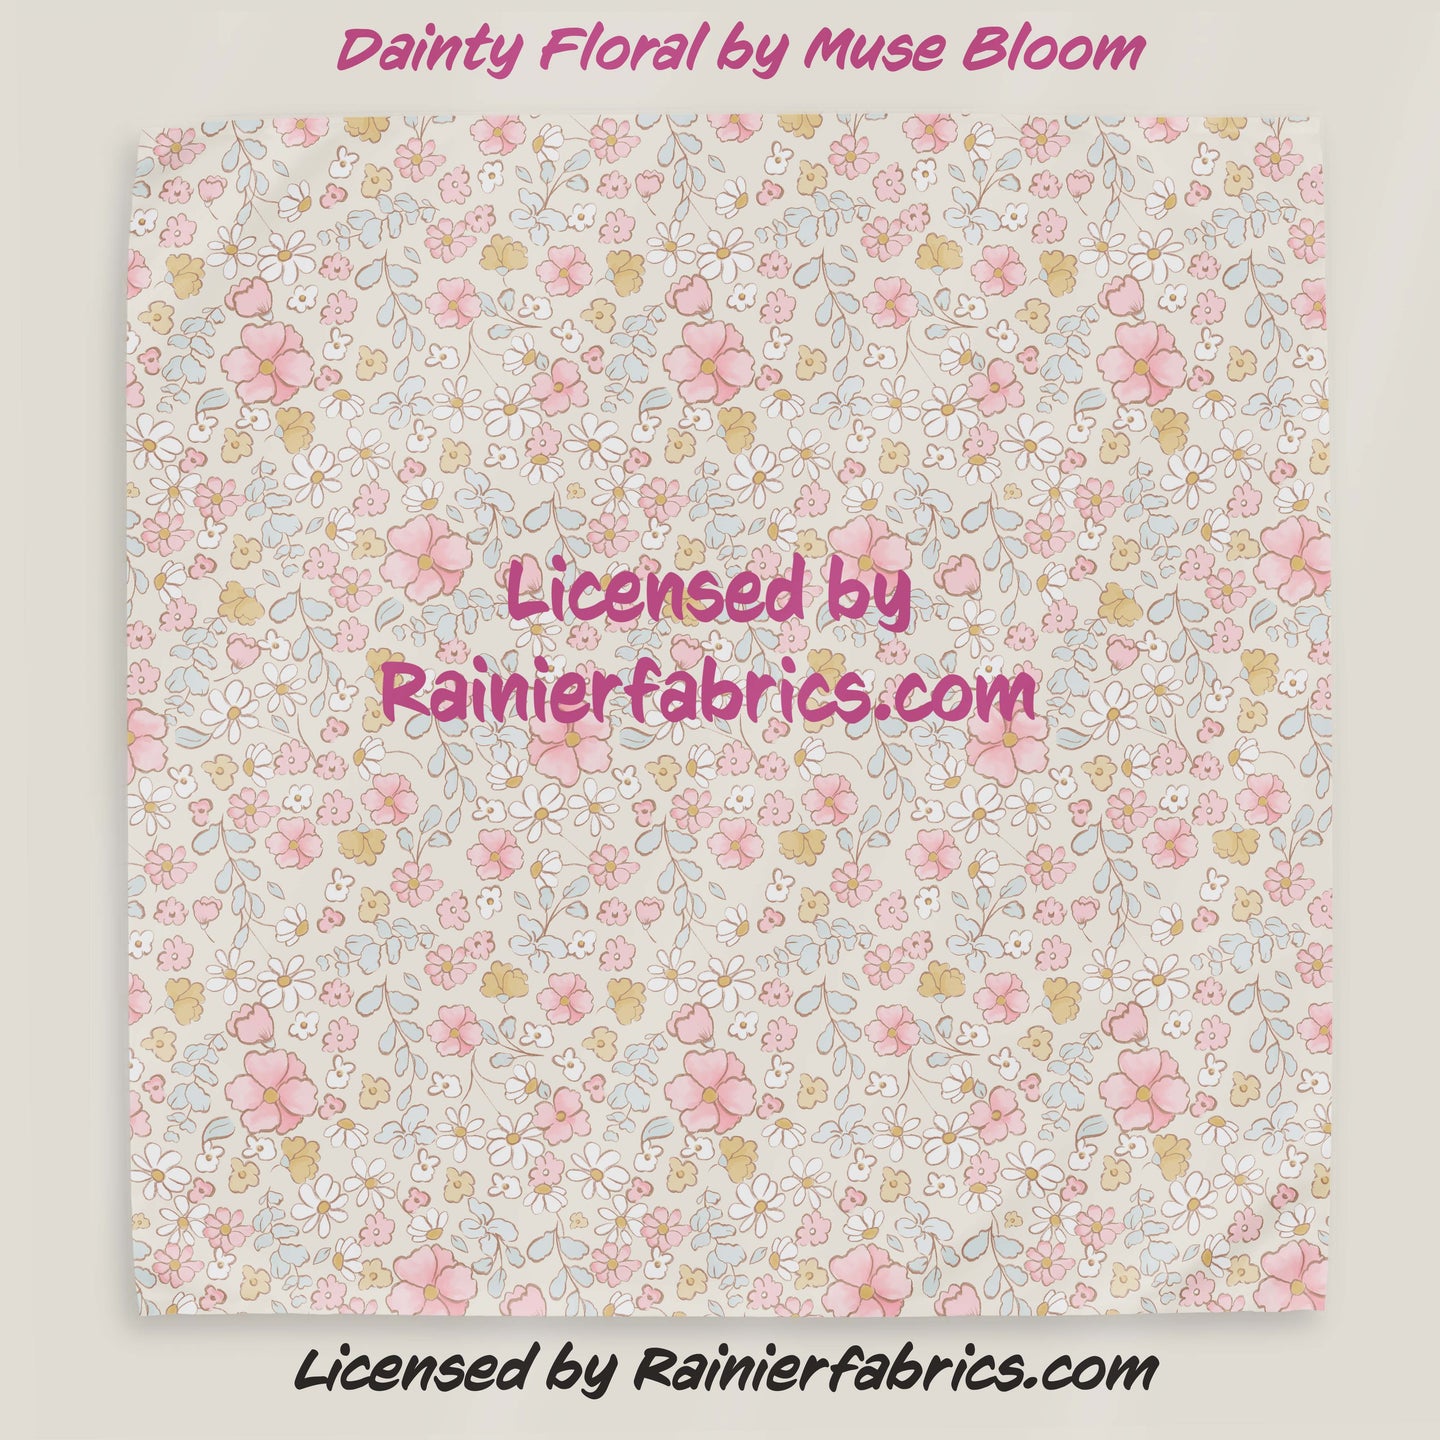 Muse Blooms Dainty Floral - 2-5 business days to ship - Order by 1/2 yard